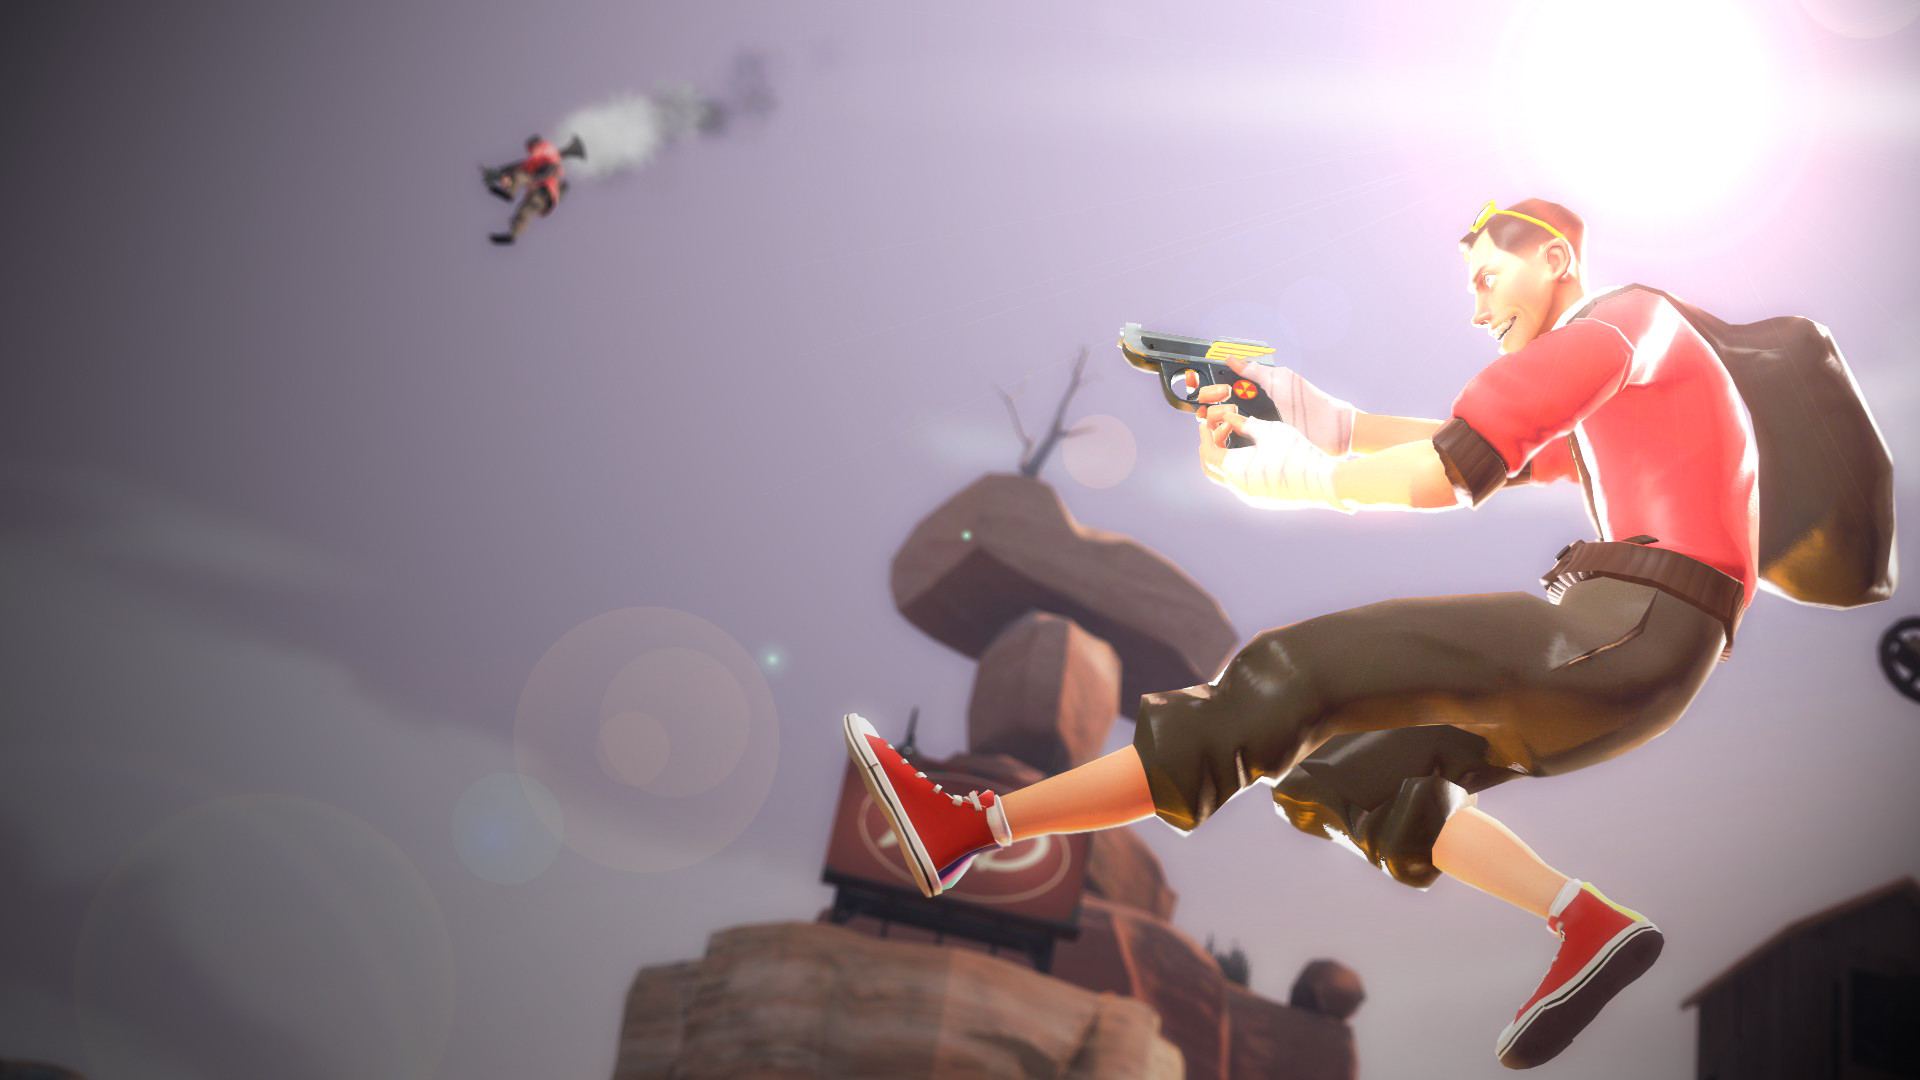 1920x1080 ... TF2 Poster: The Scout (Garry's Mod) by SideZeo